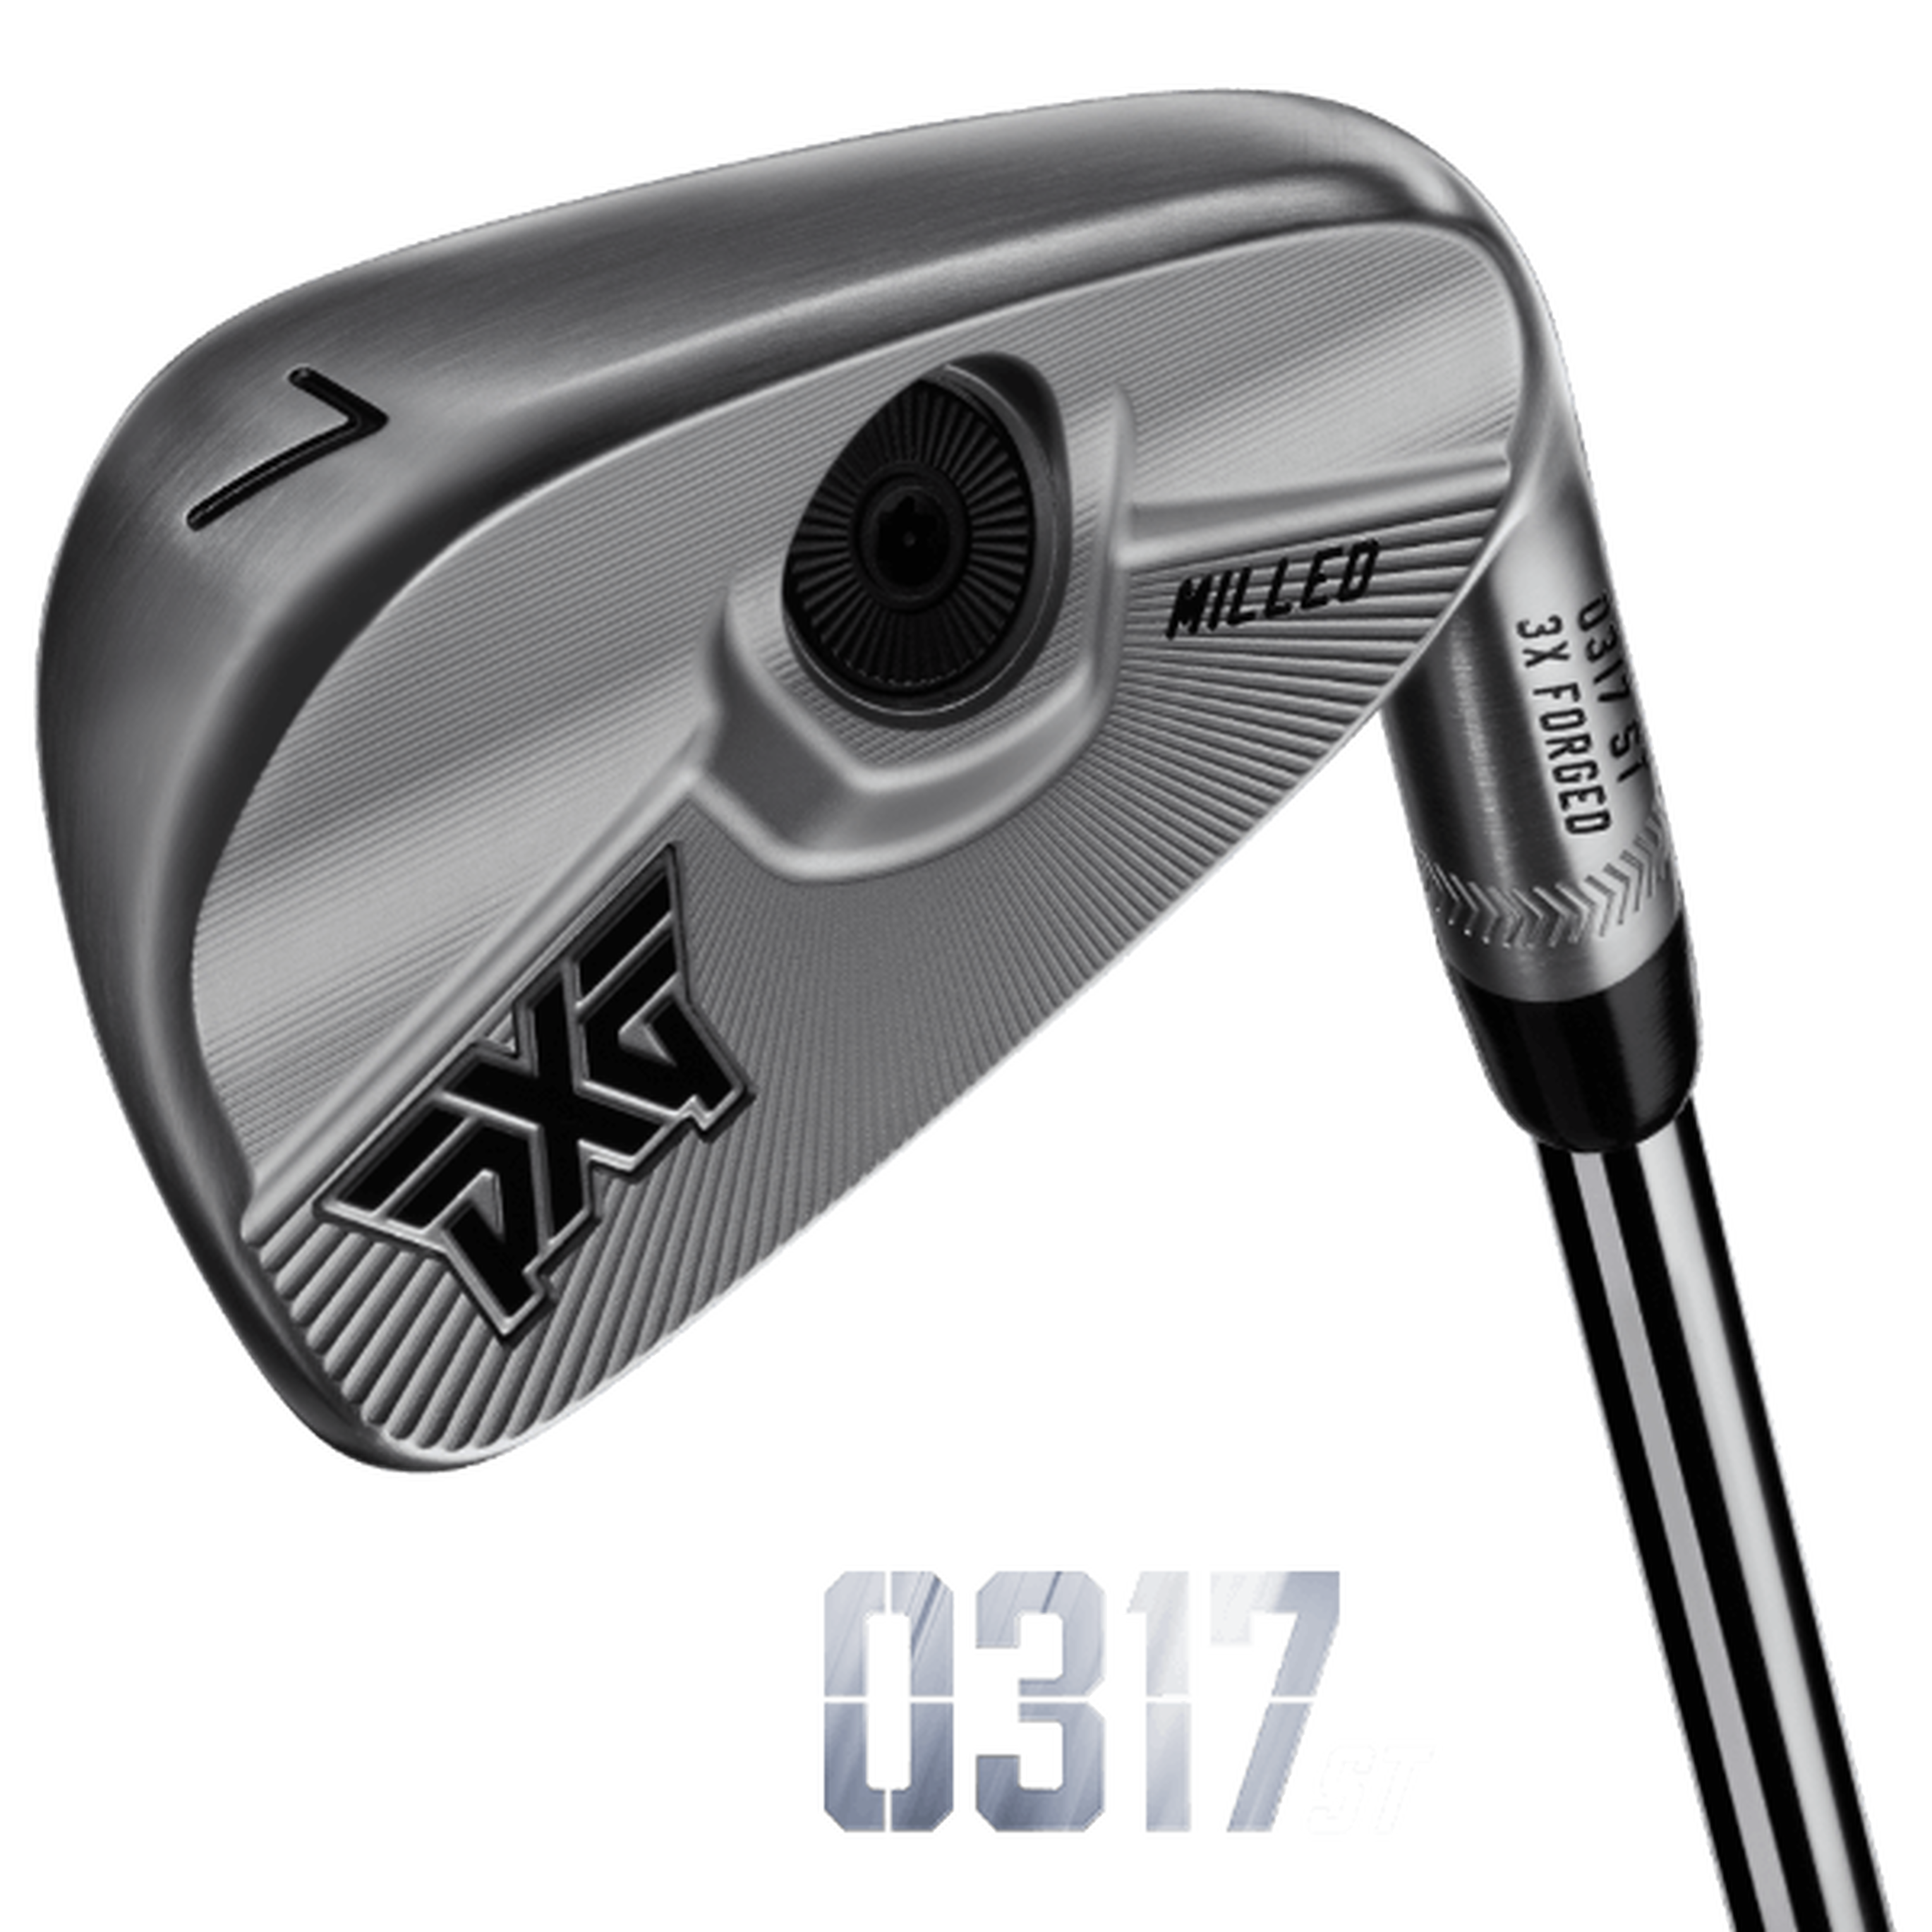 0317 ST Players Irons